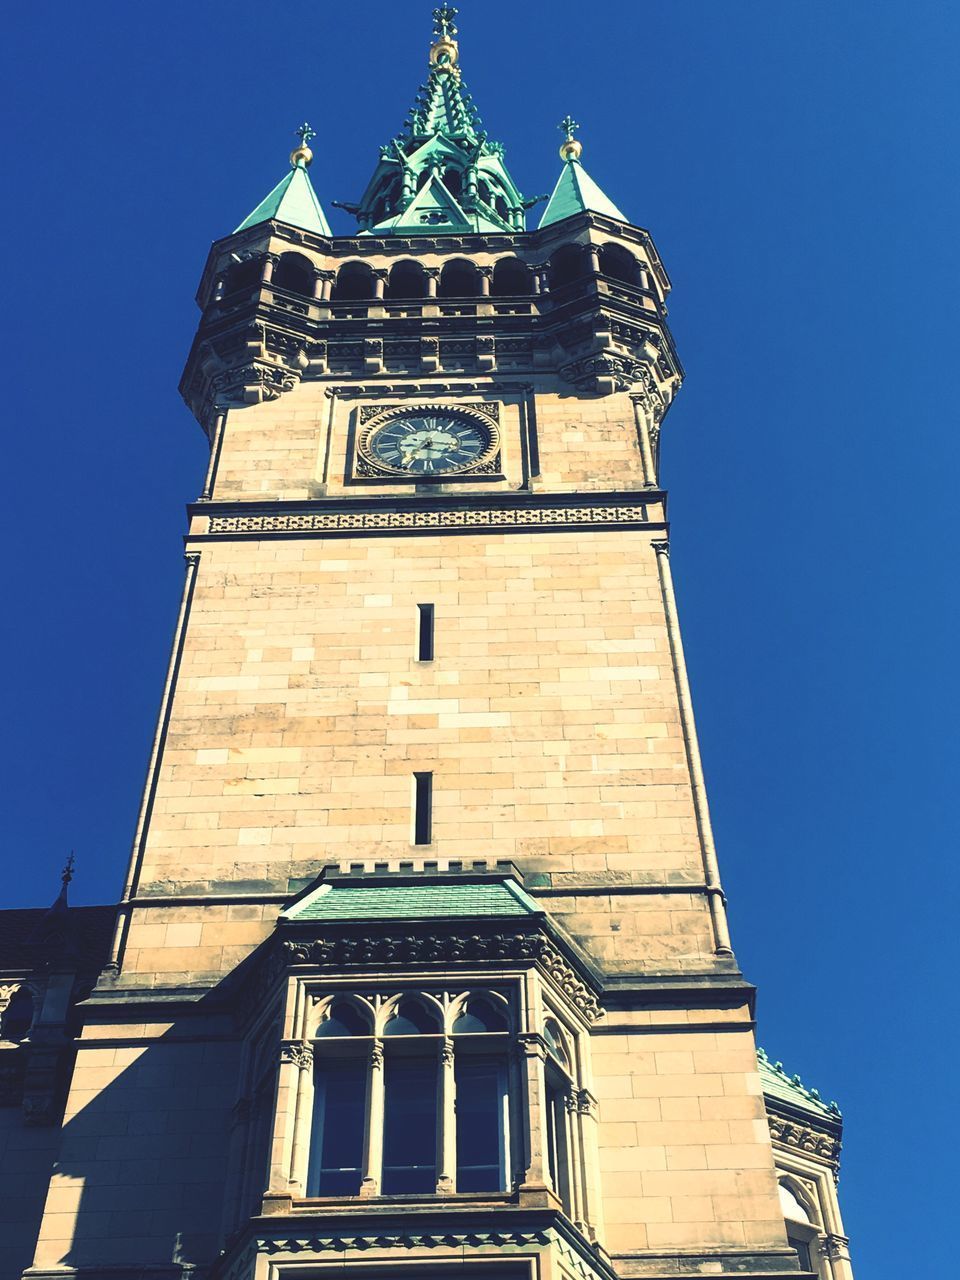 LOW ANGLE VIEW OF CLOCK TOWER AGAINST BLUE SKY